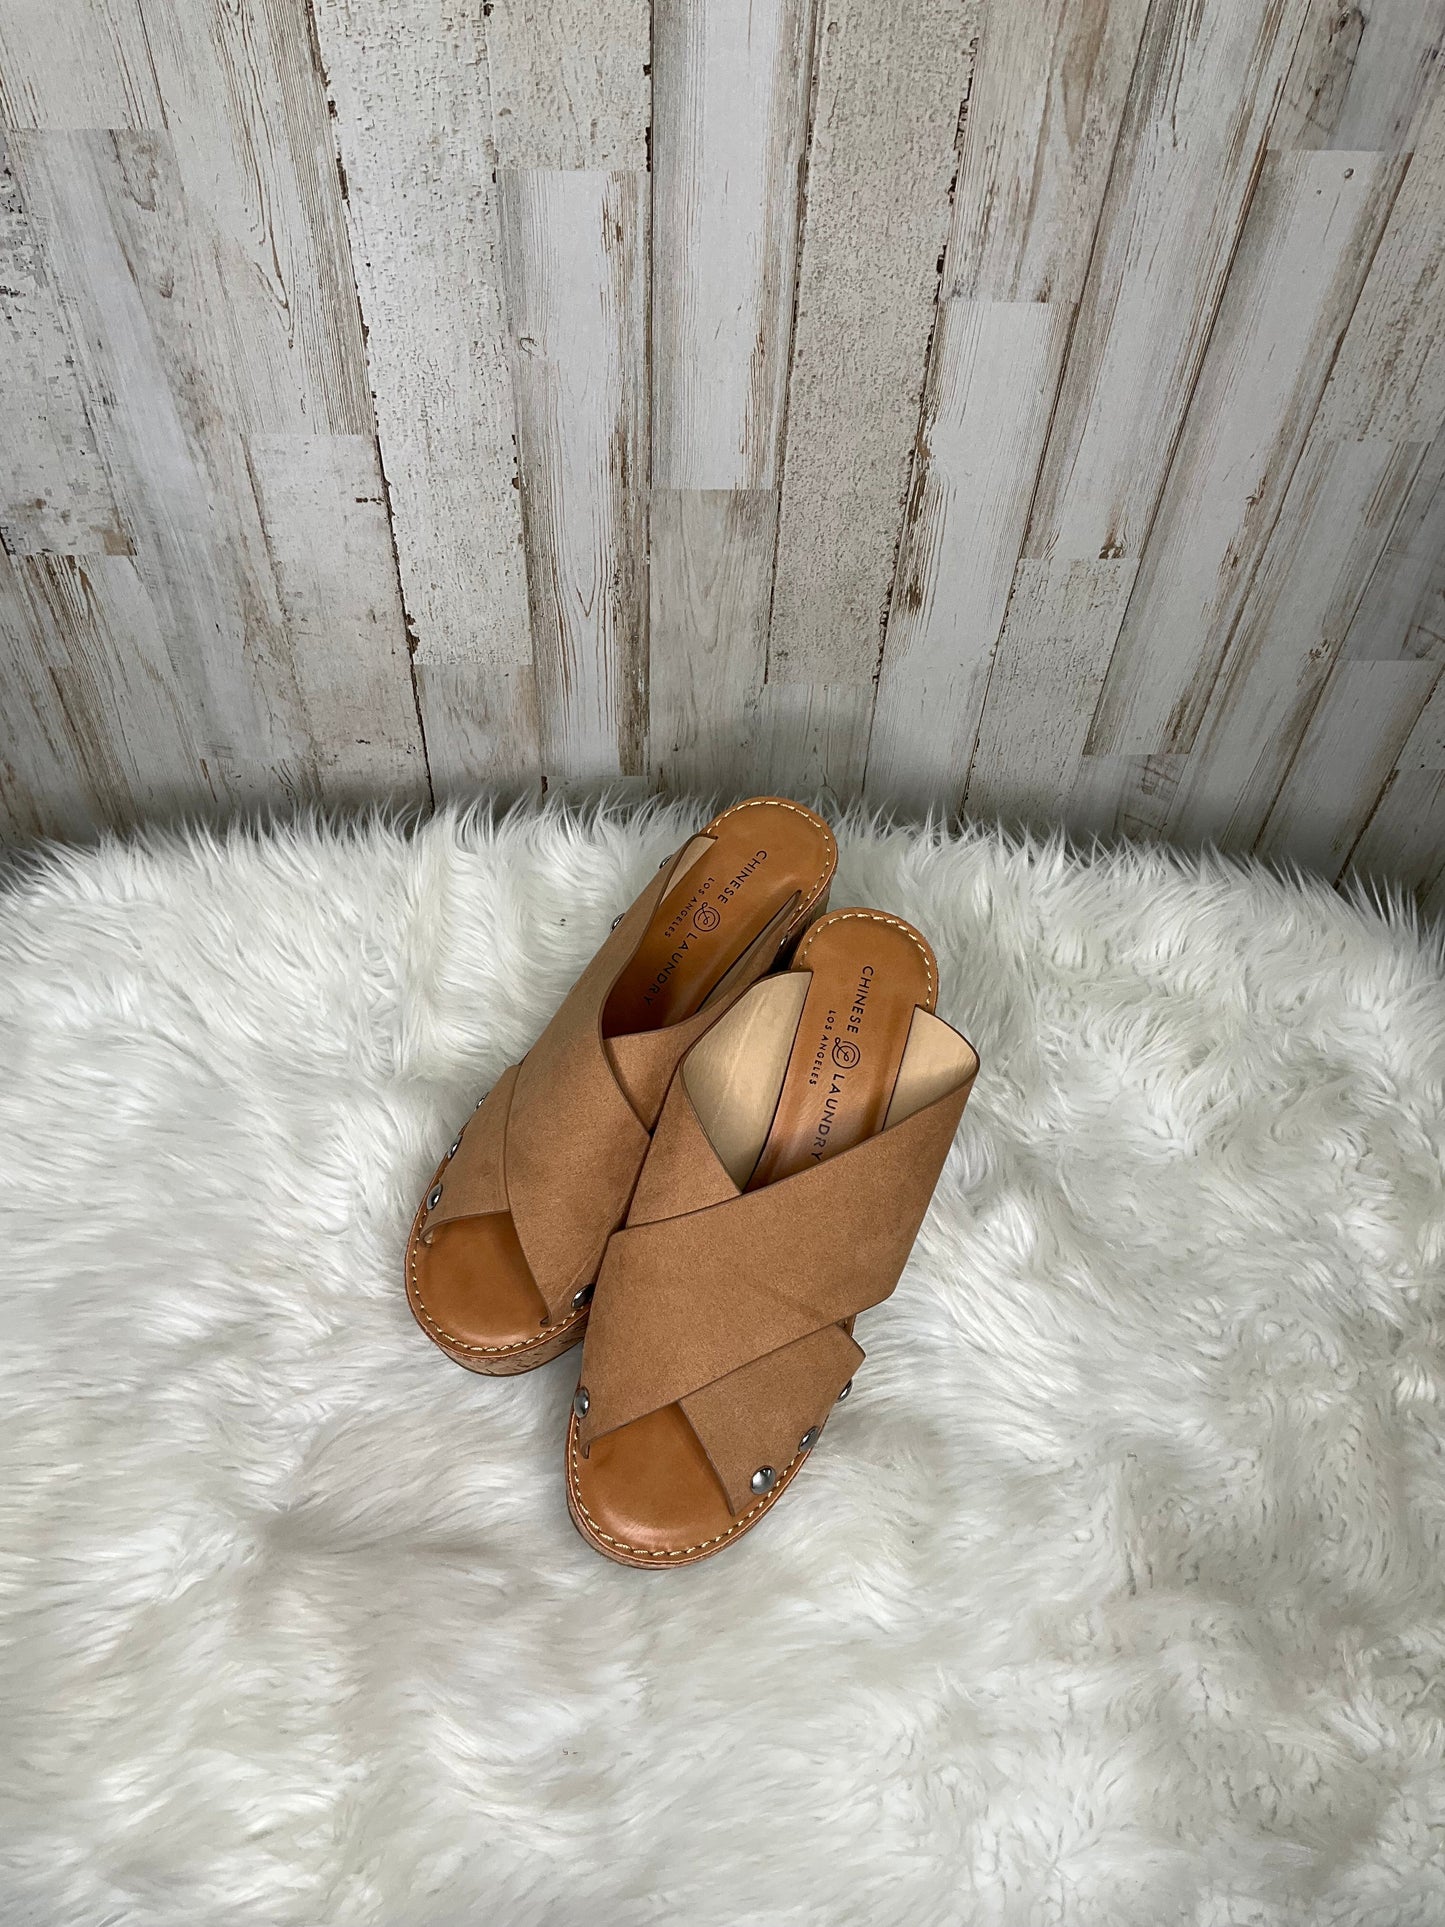 Sandals Heels Wedge By Chinese Laundry  Size: 10